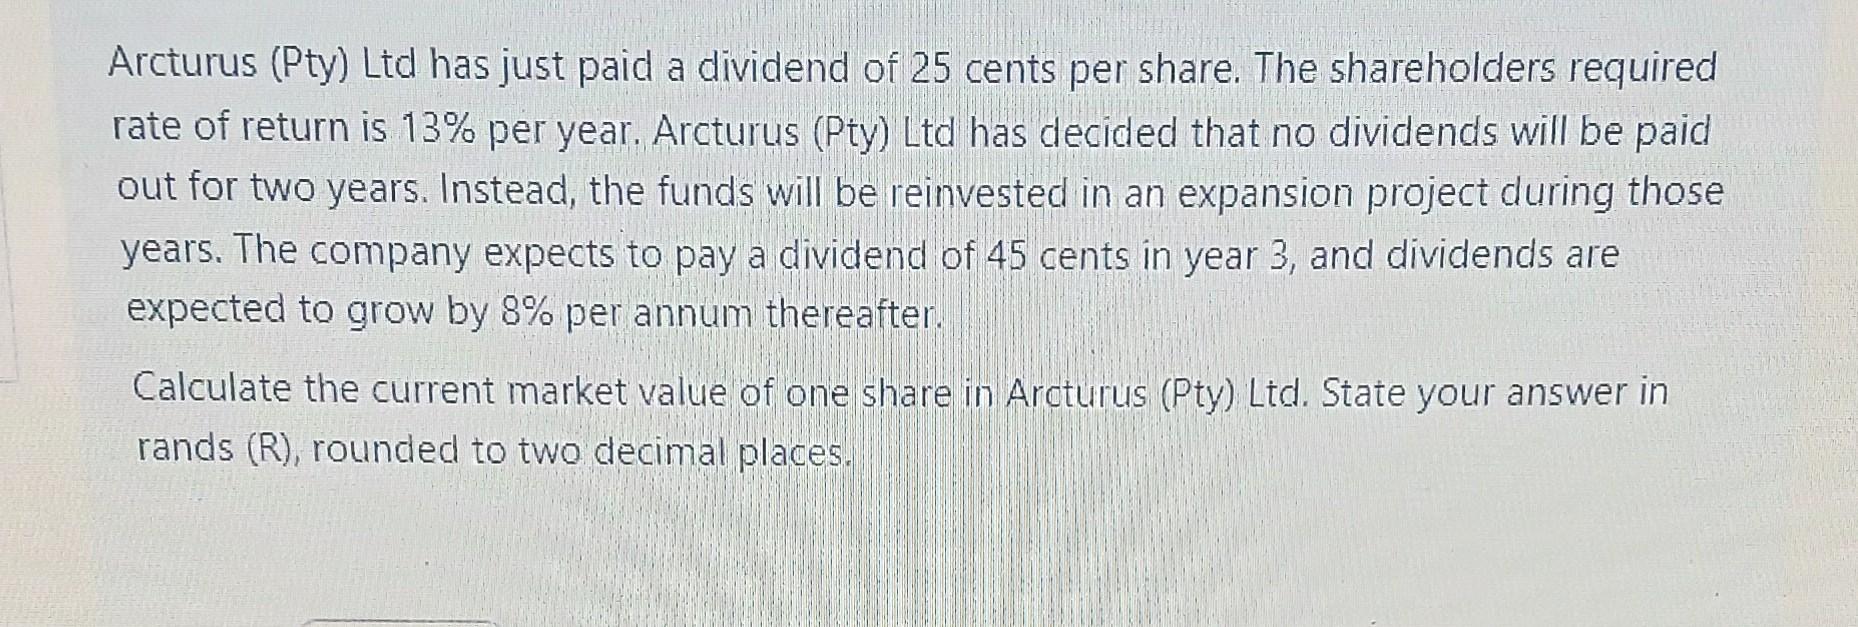 Arcturus (Pty) Ltd has just paid a dividend of 25 cents per share. The shareholders required rate of return